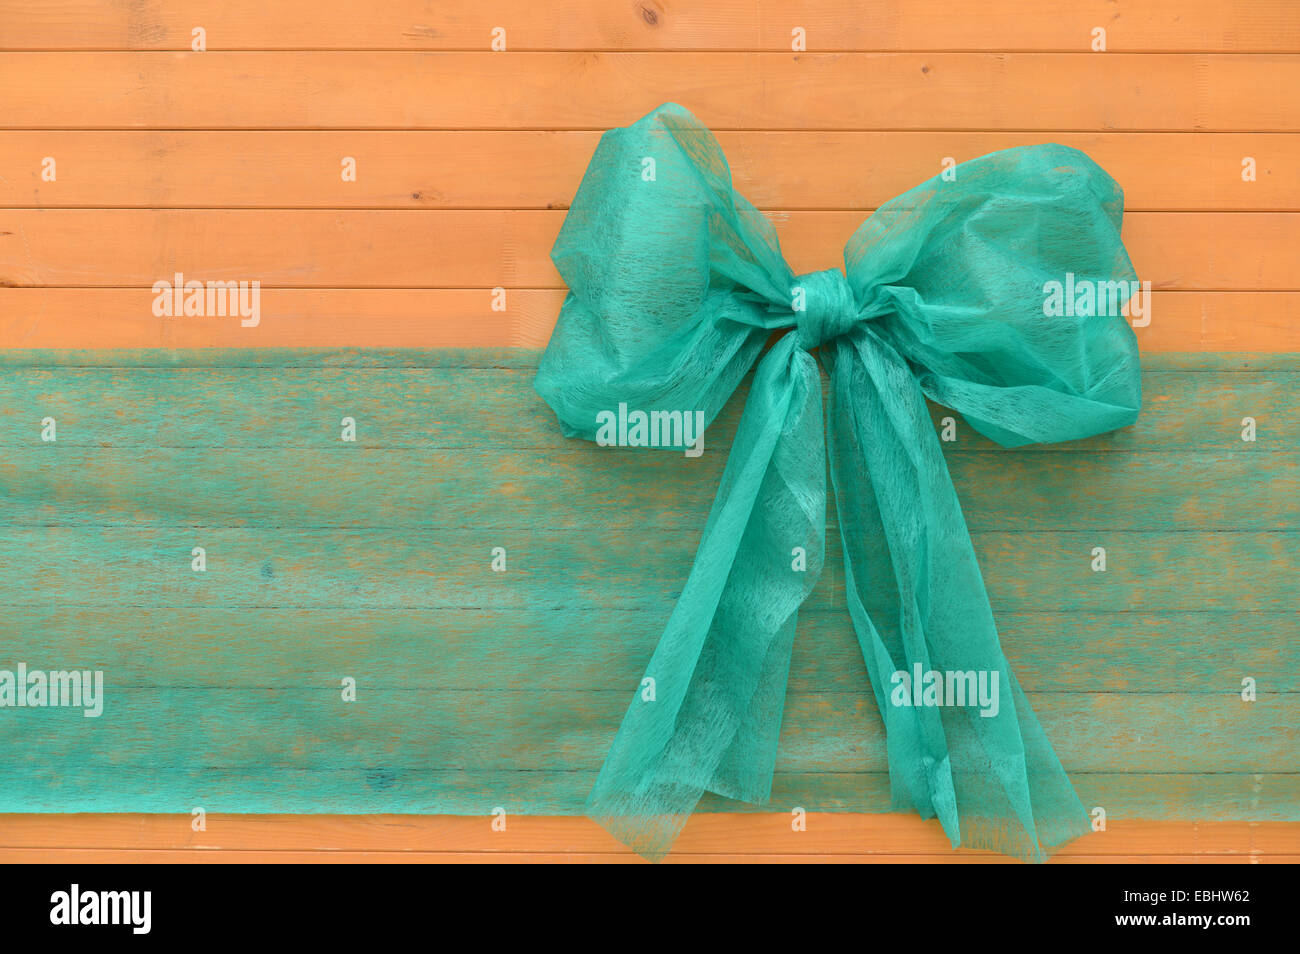 Big green ribbon on wood. Used as background, space for text. Stock Photo